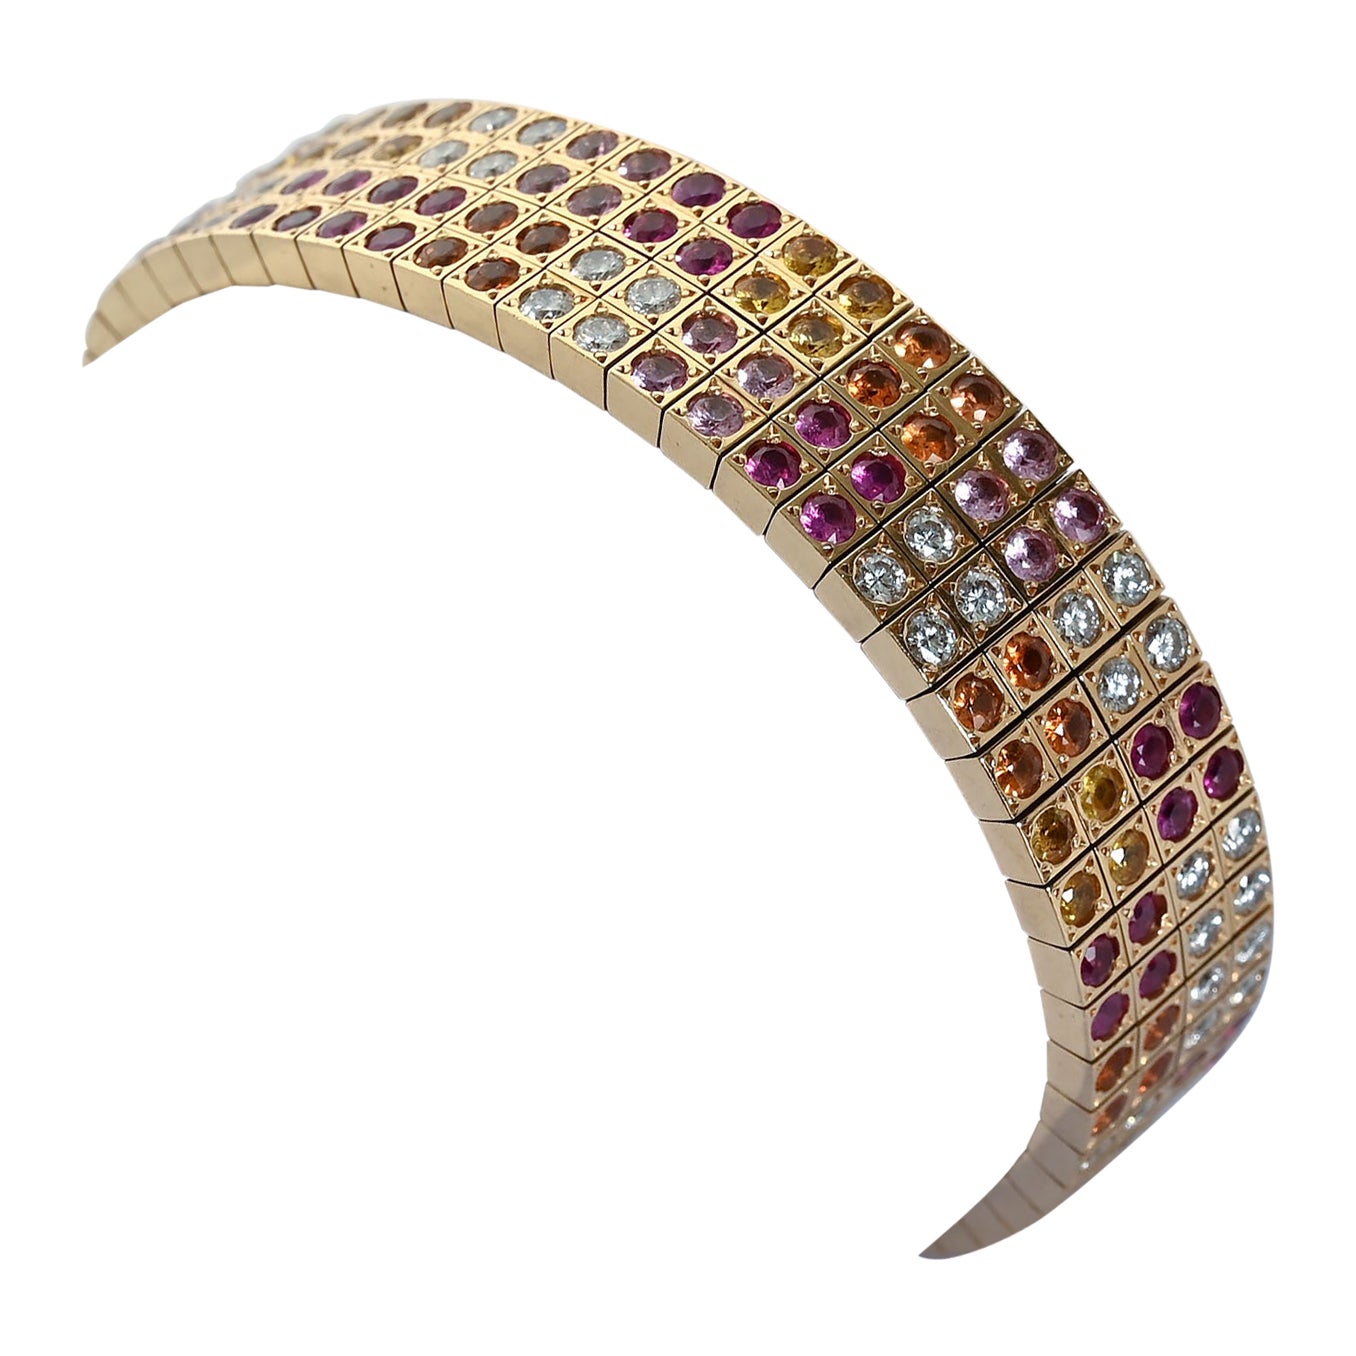 Cartier Strap Bracelet with Diamonds and Sapphires